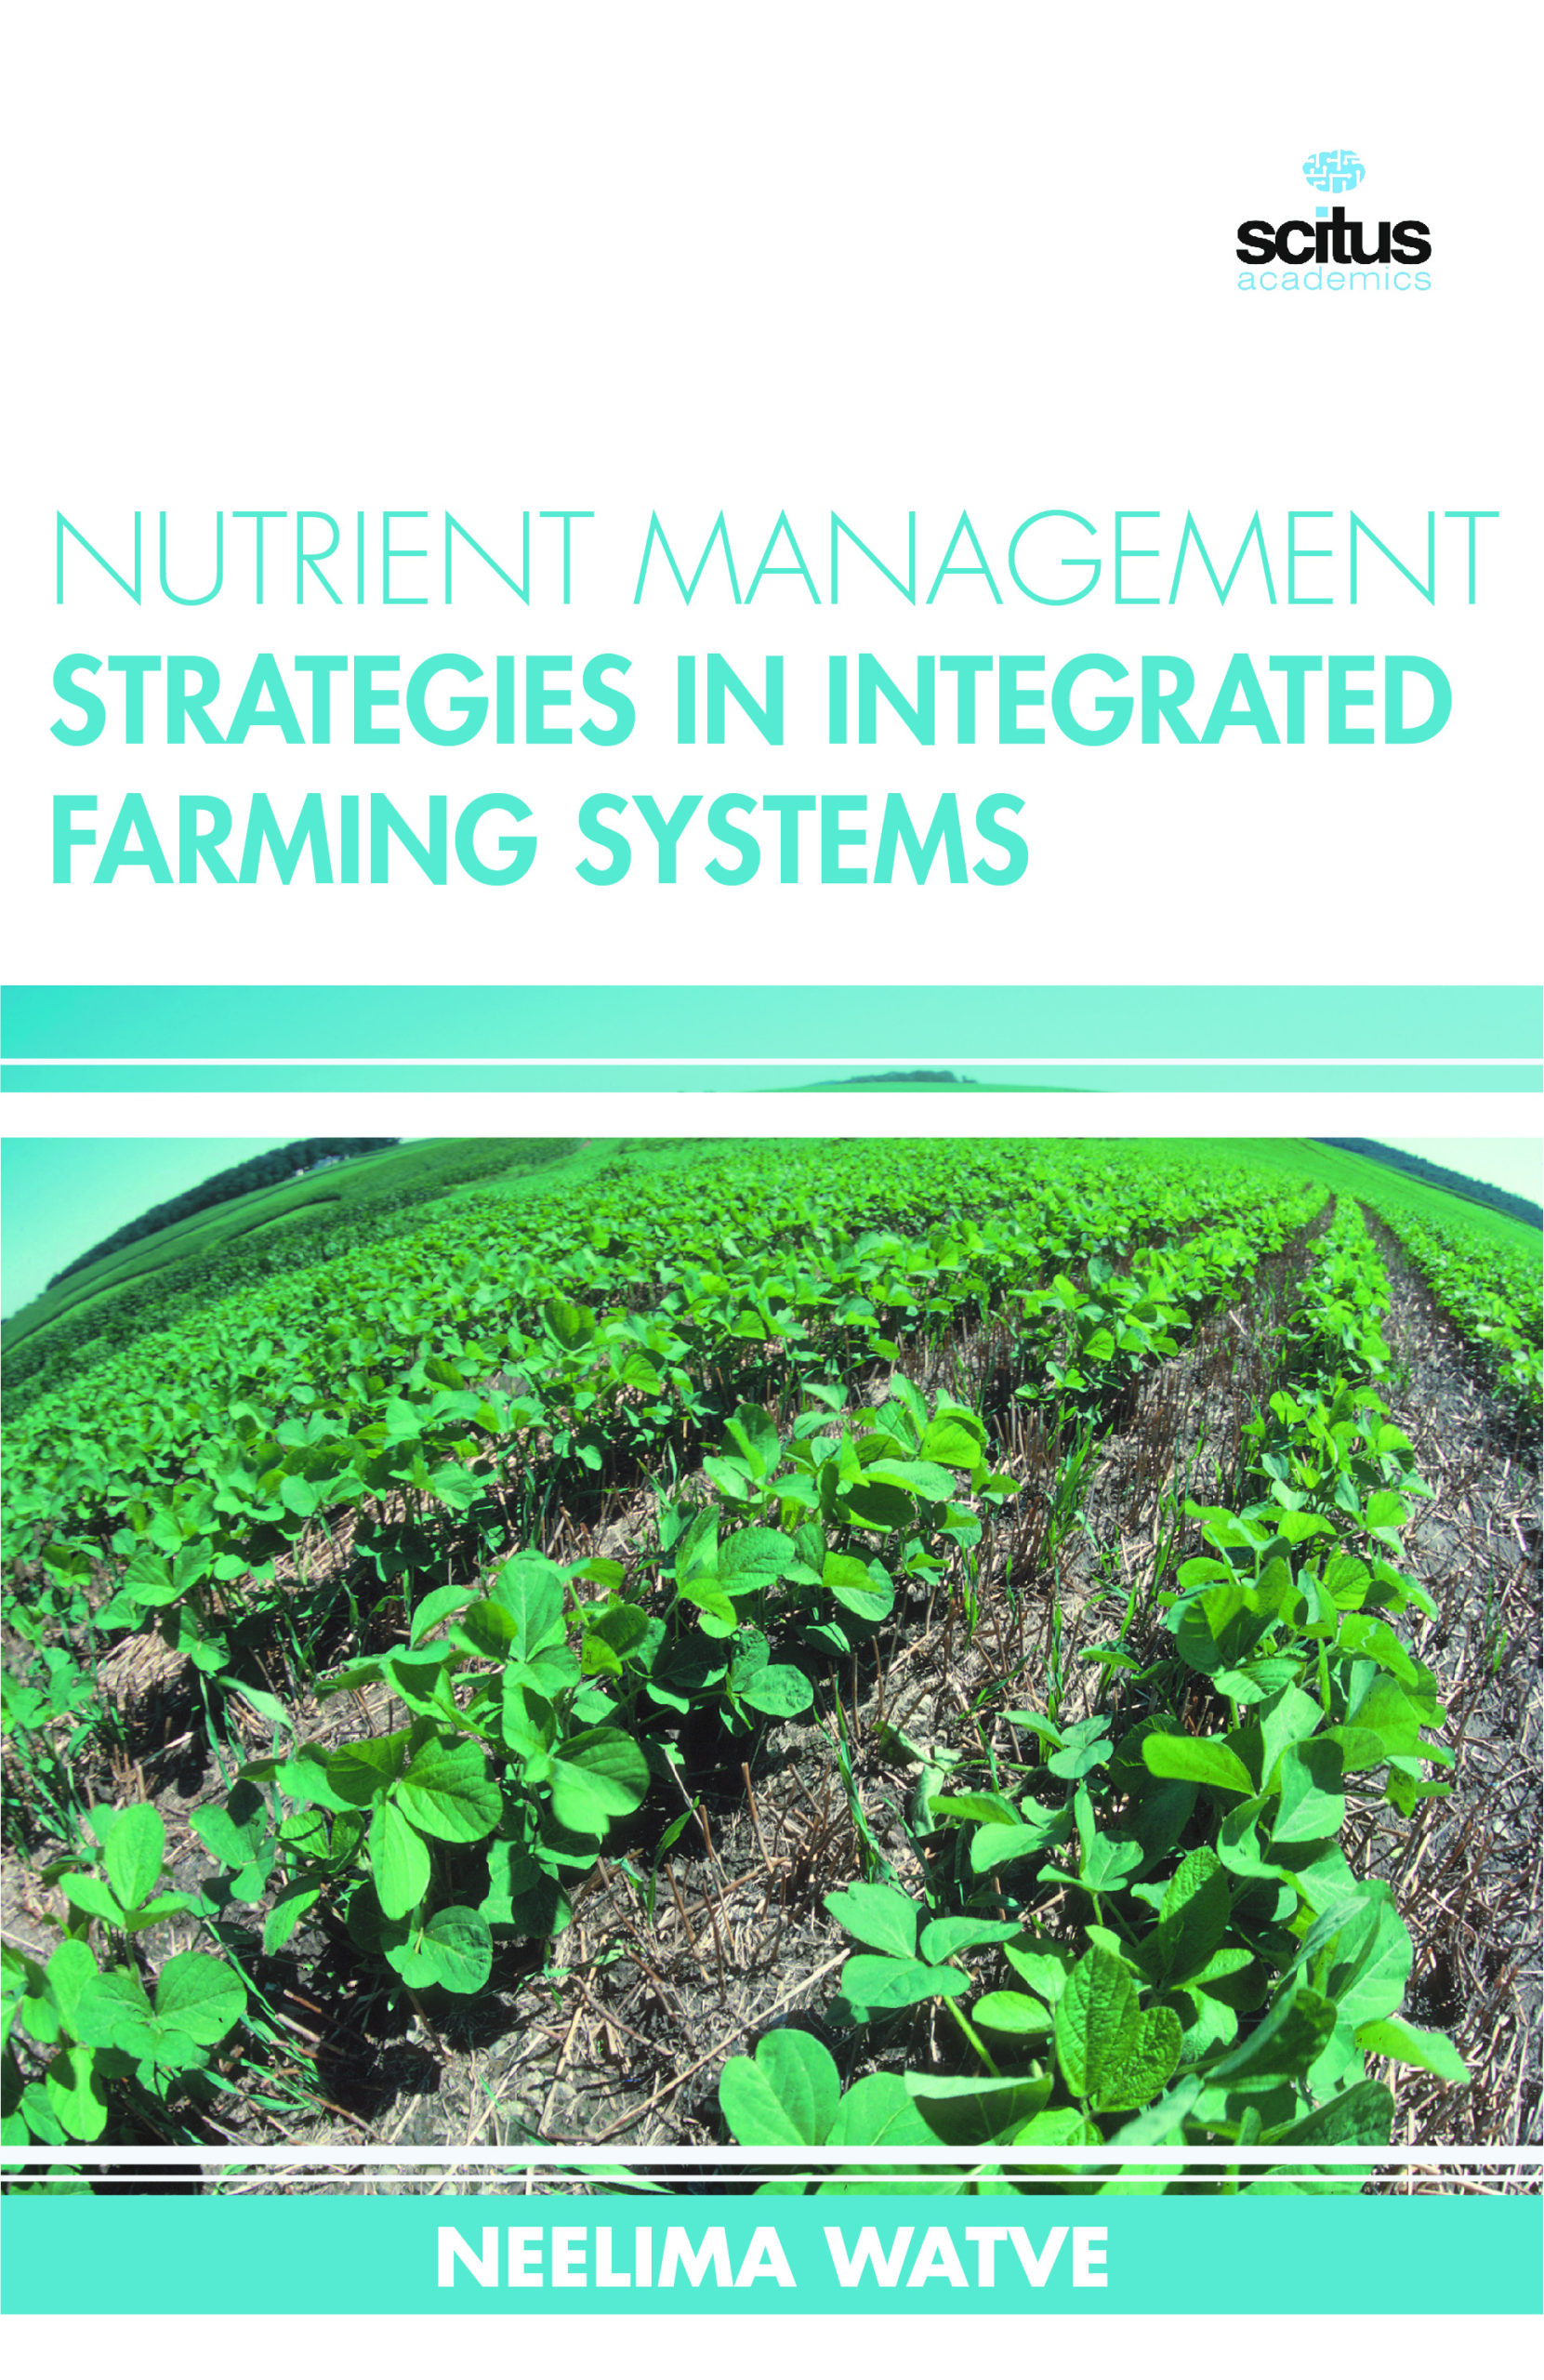 research article on nutrient management